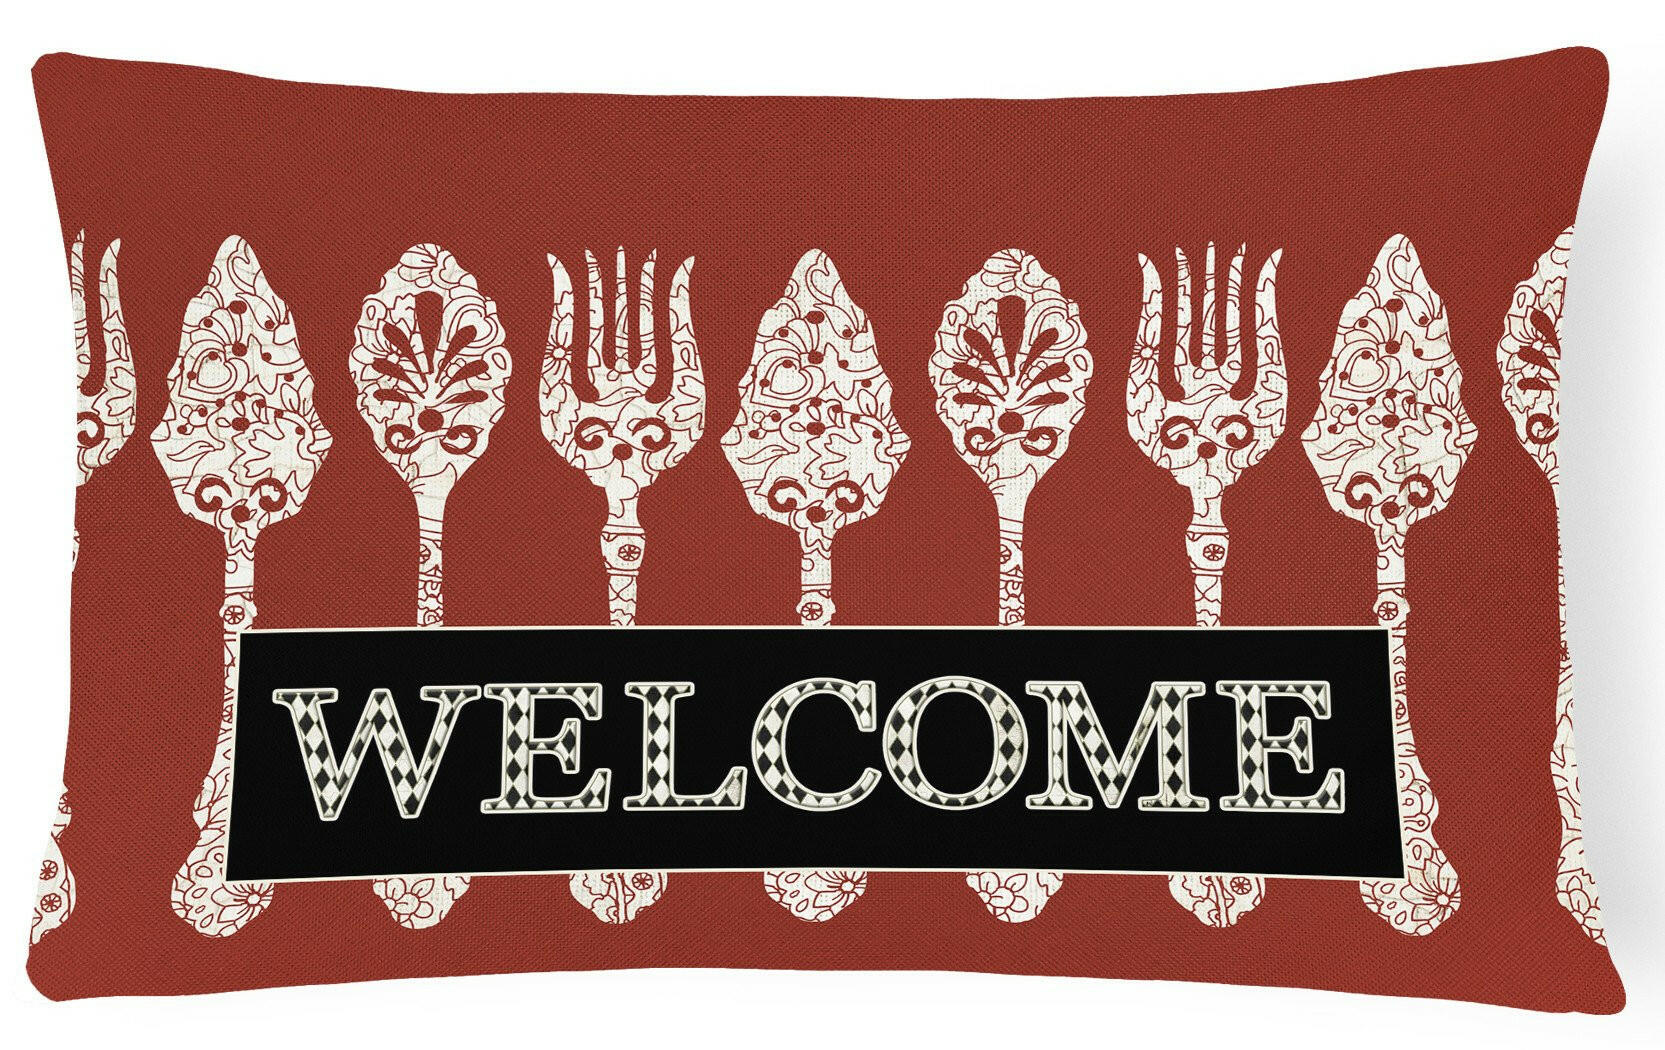 Serving Spoons Welcome   Canvas Fabric Decorative Pillow SB3090PW1216 by Caroline's Treasures